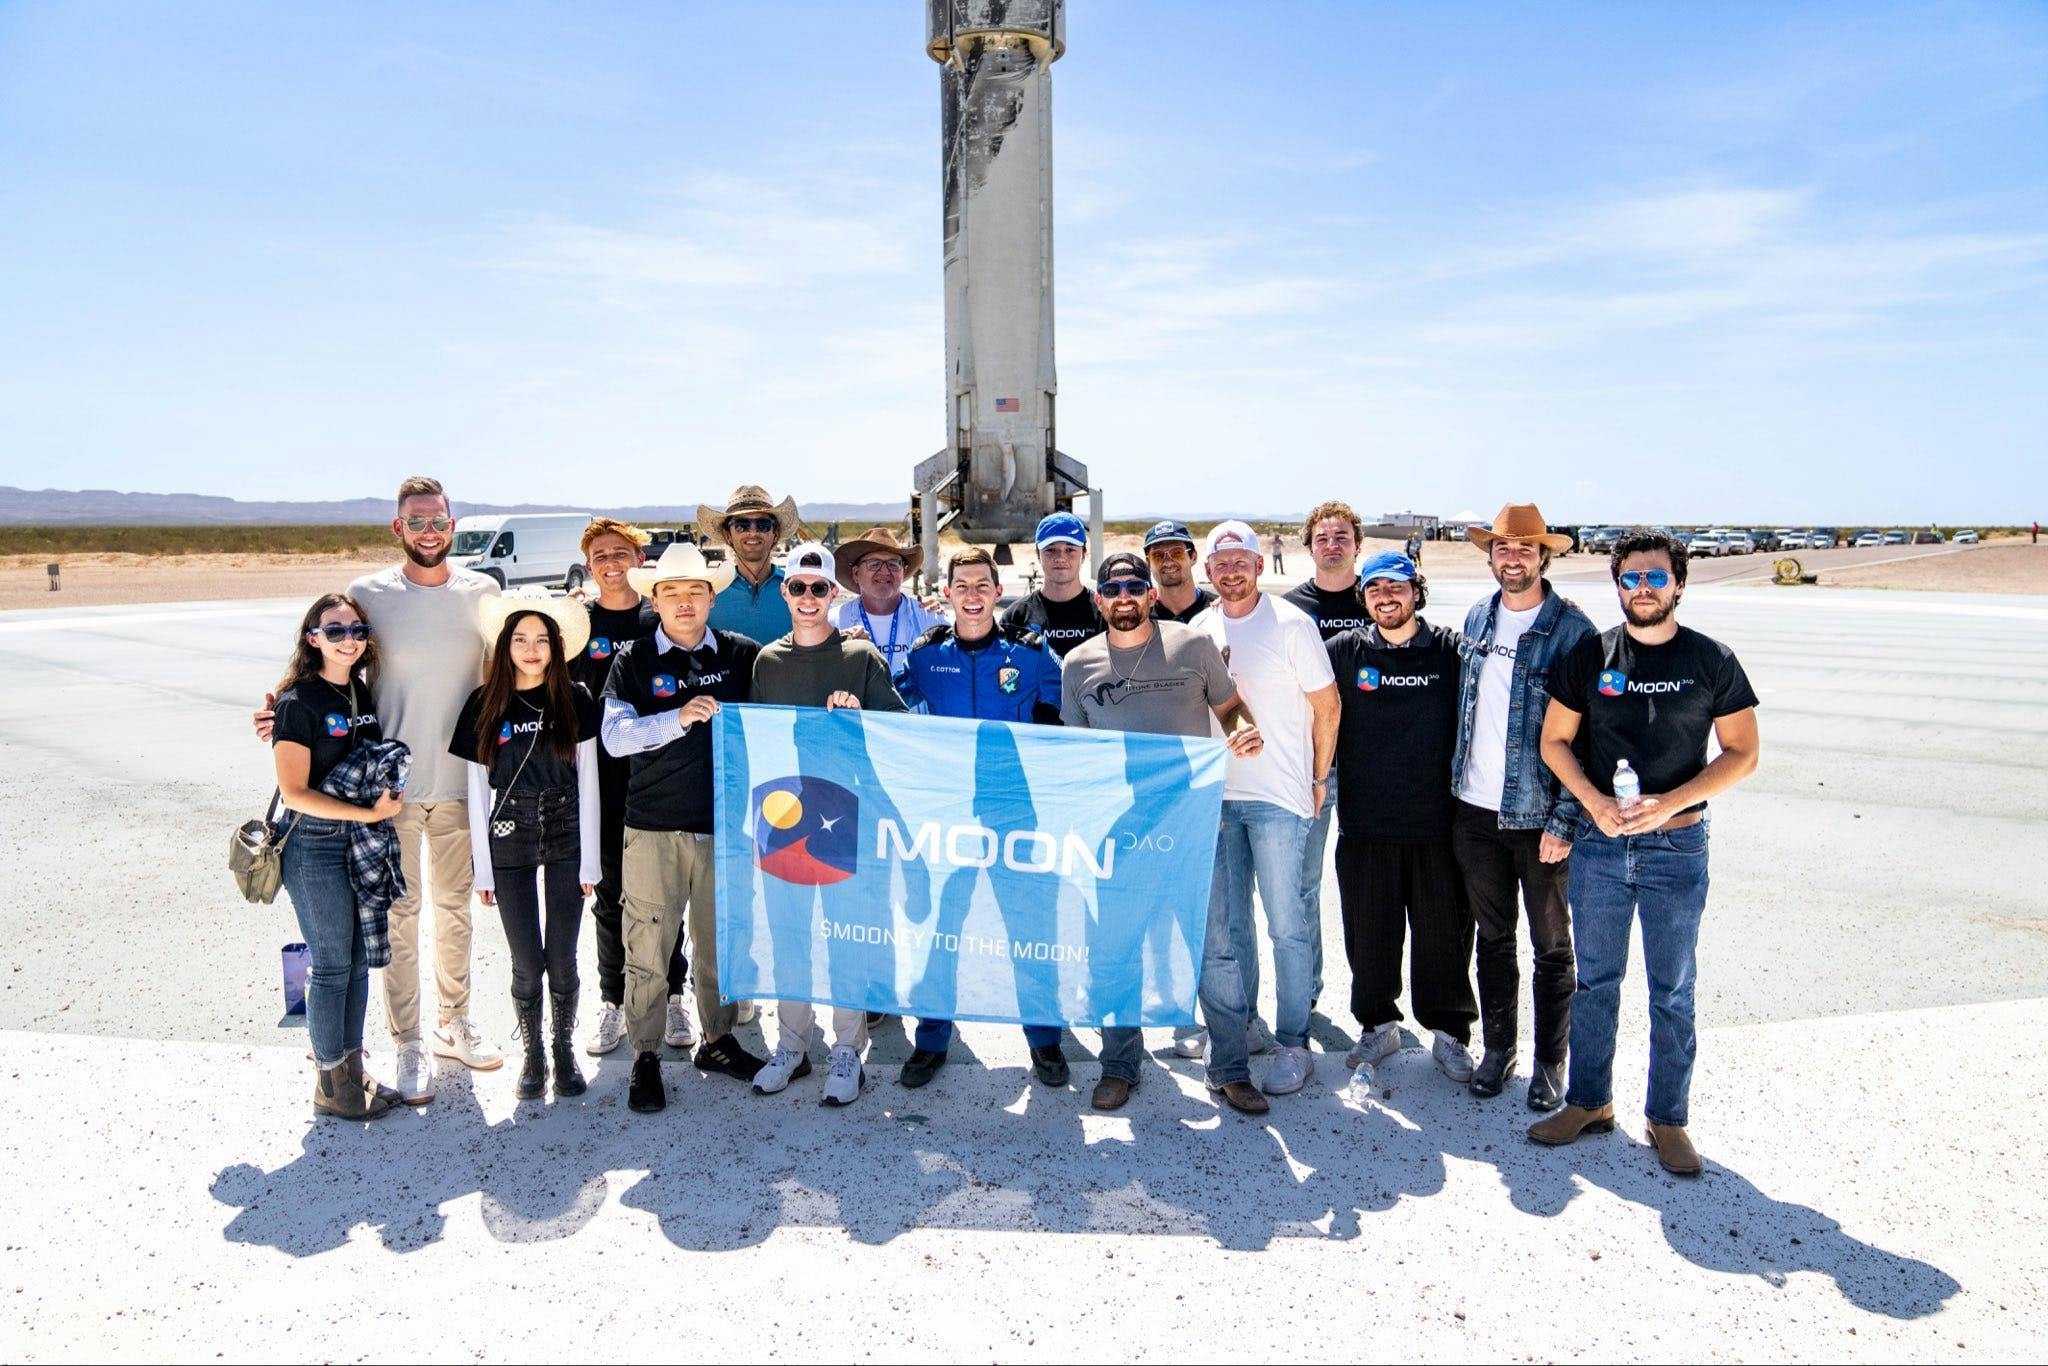 MoonDAO celebrating the launch of their first astronaut (Coby Cotton) in front of Blue Origin's rocket